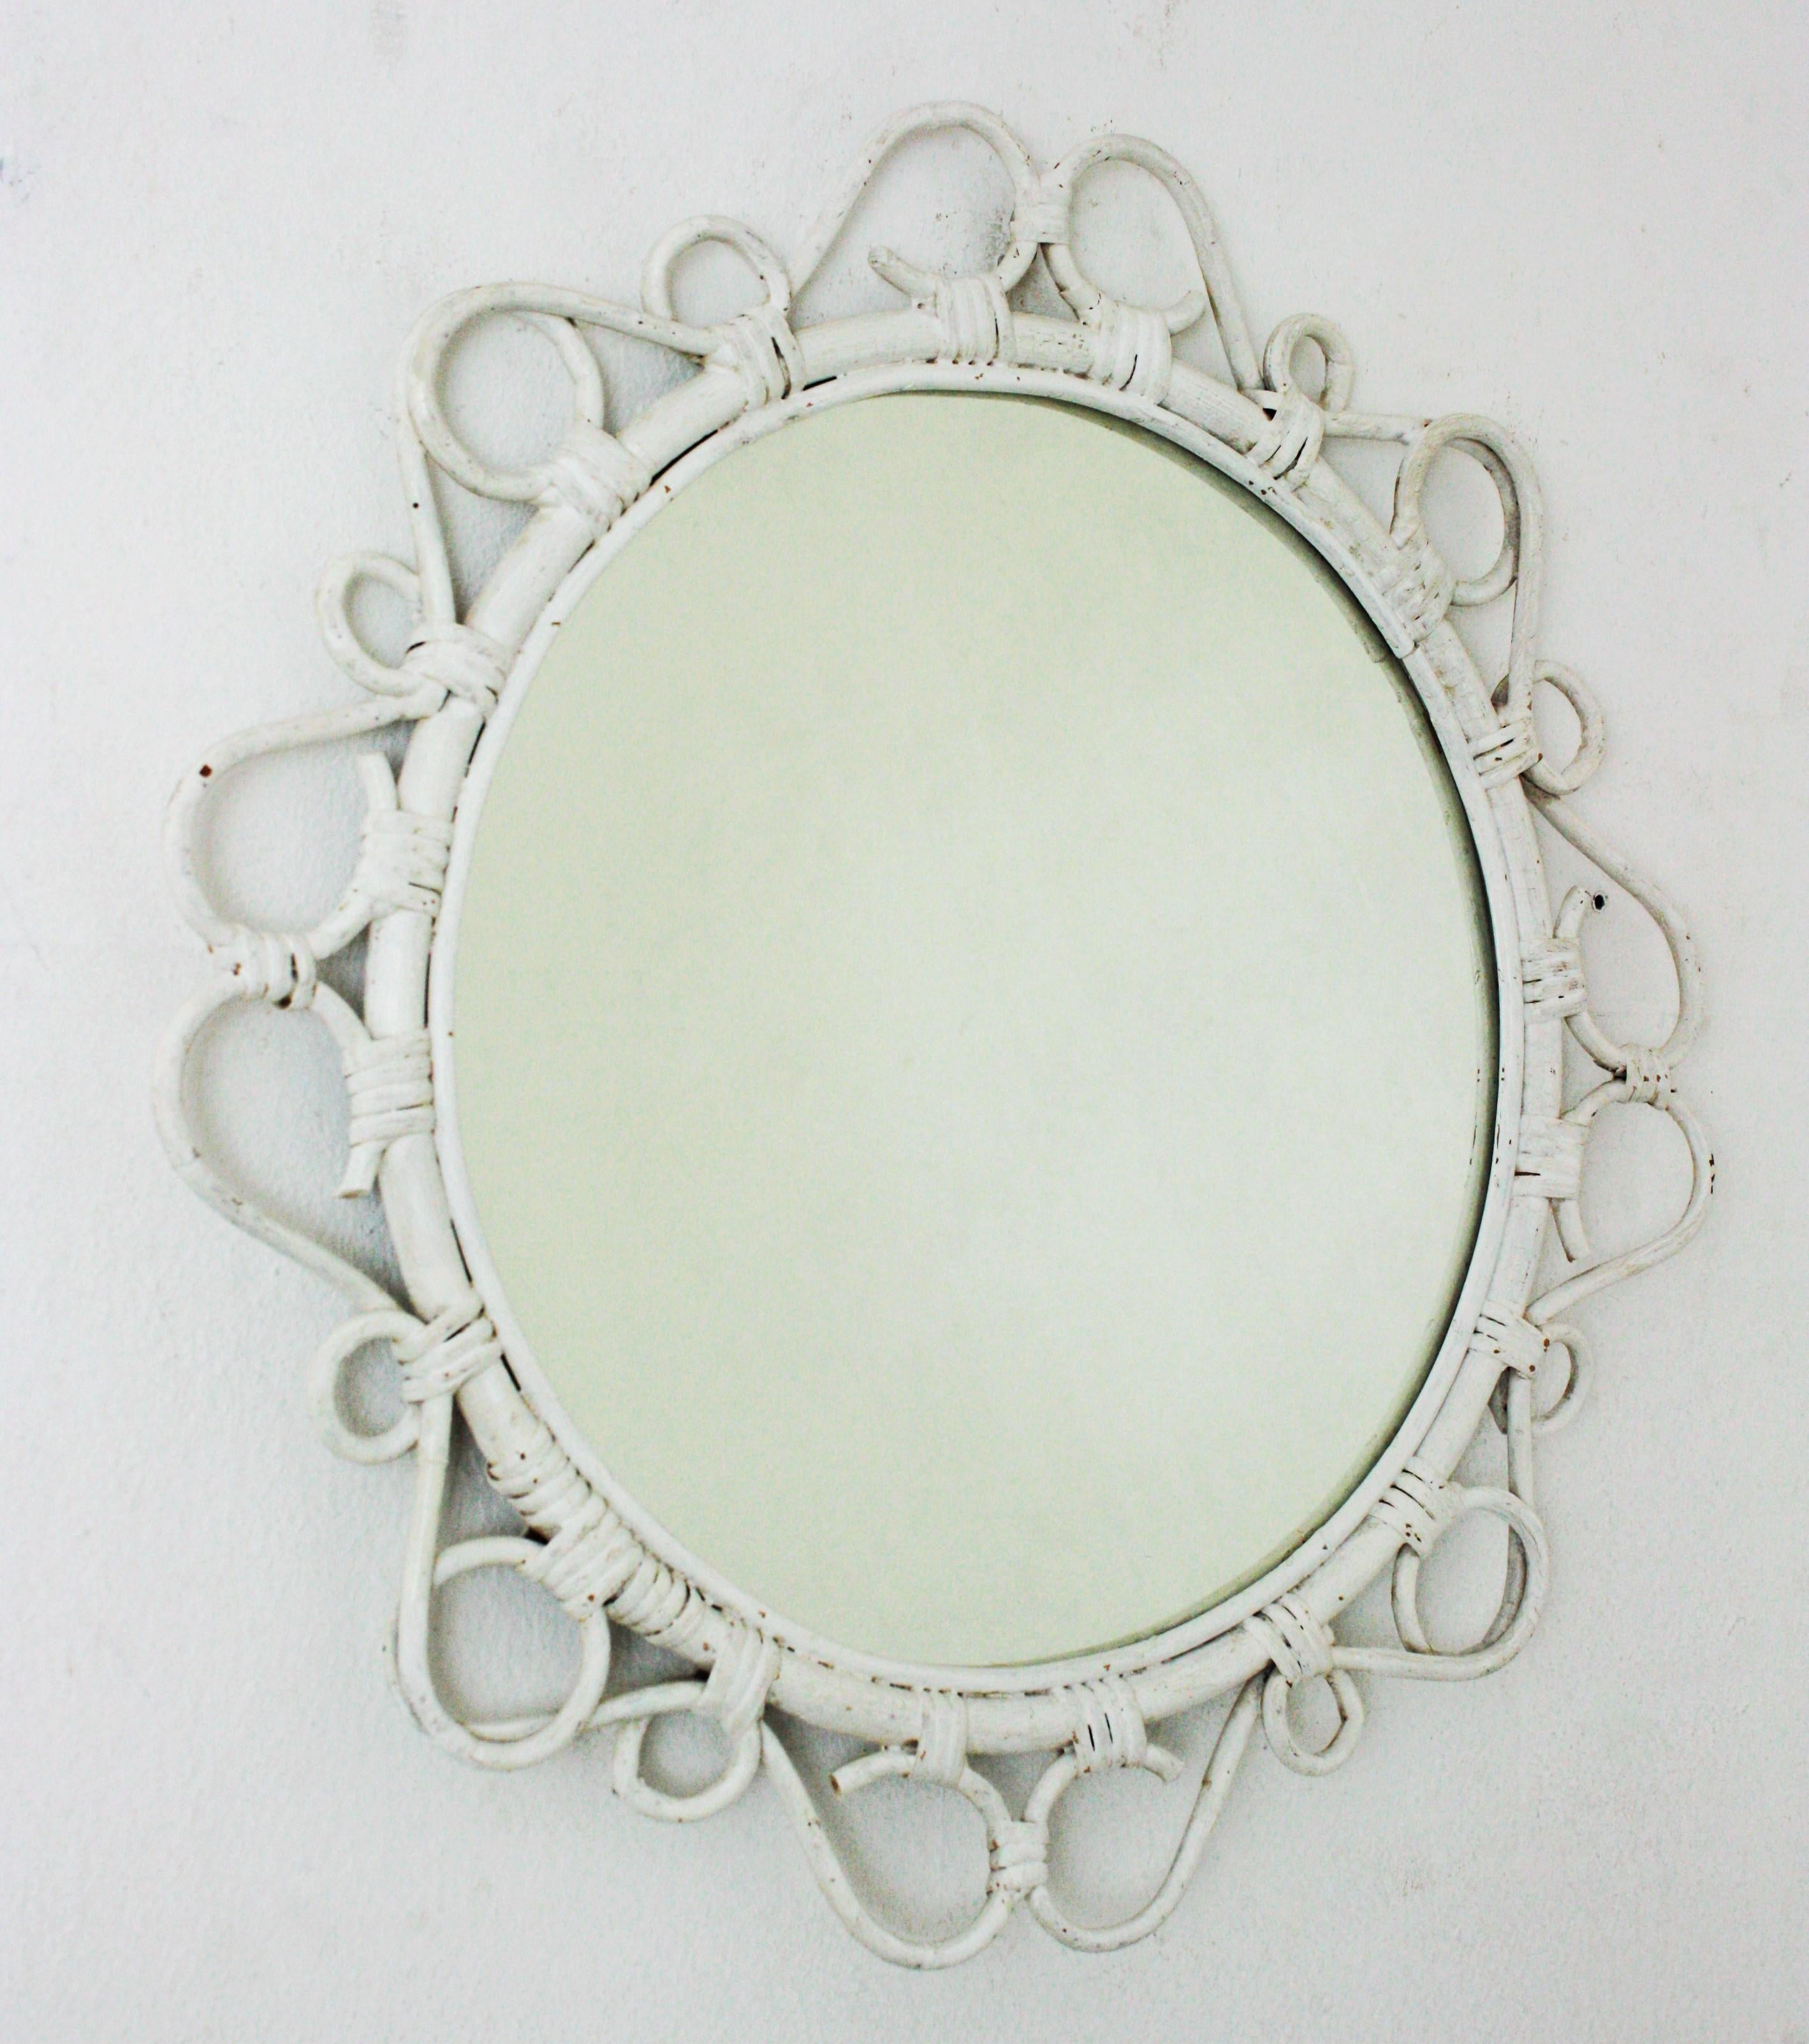 20th Century Rattan Round Mirror with Scroll Details and White Patina For Sale